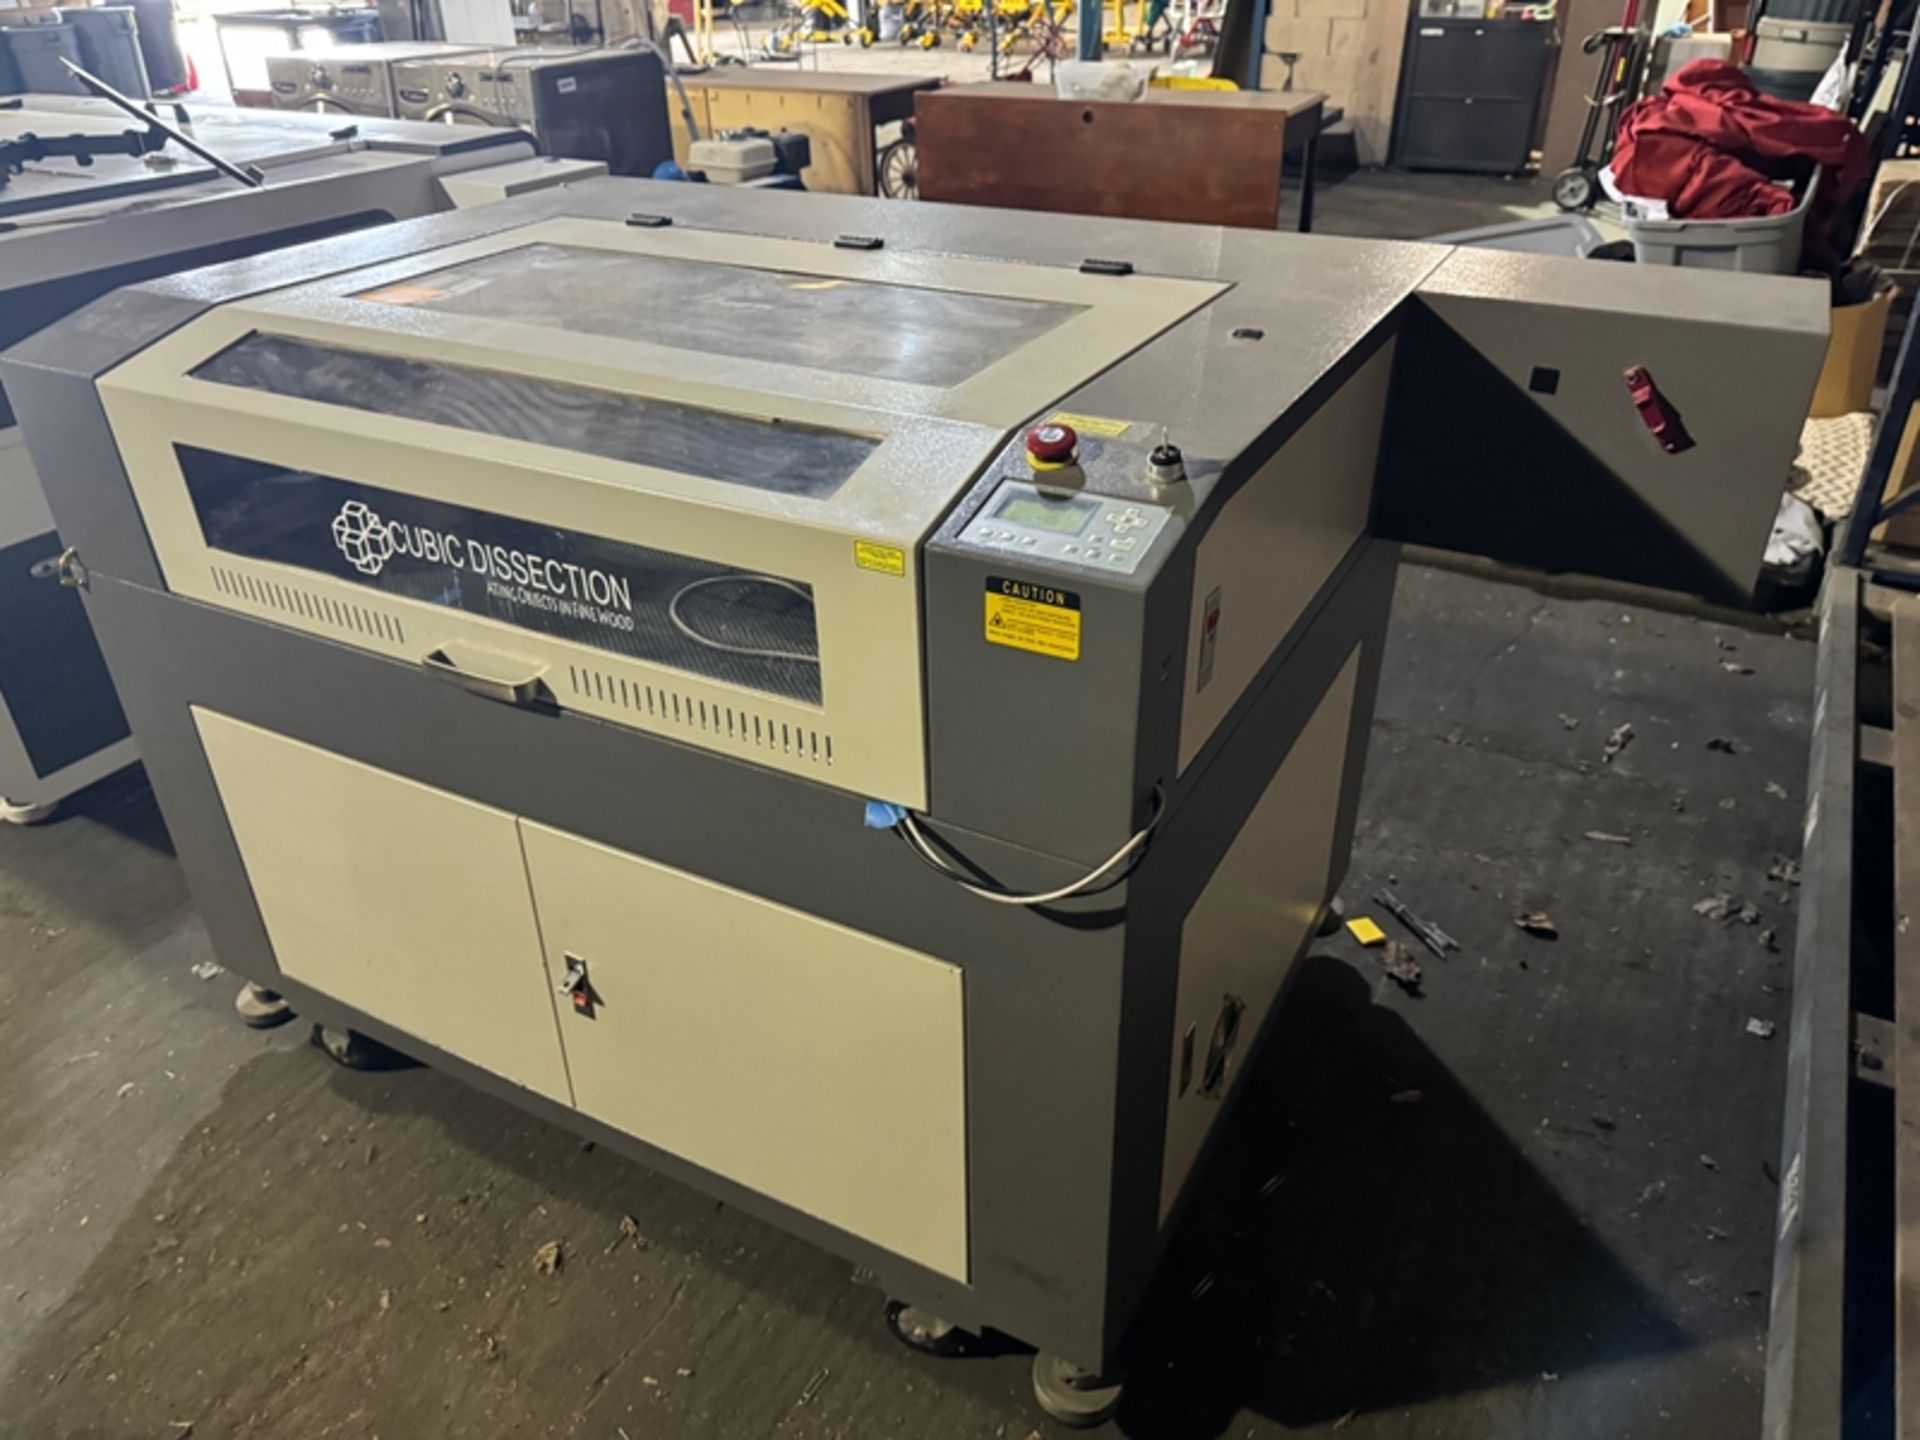 2008 JINAN Model LC6090 laser engraving machine approximately 36" X 24" cutting surface area with - Image 4 of 6